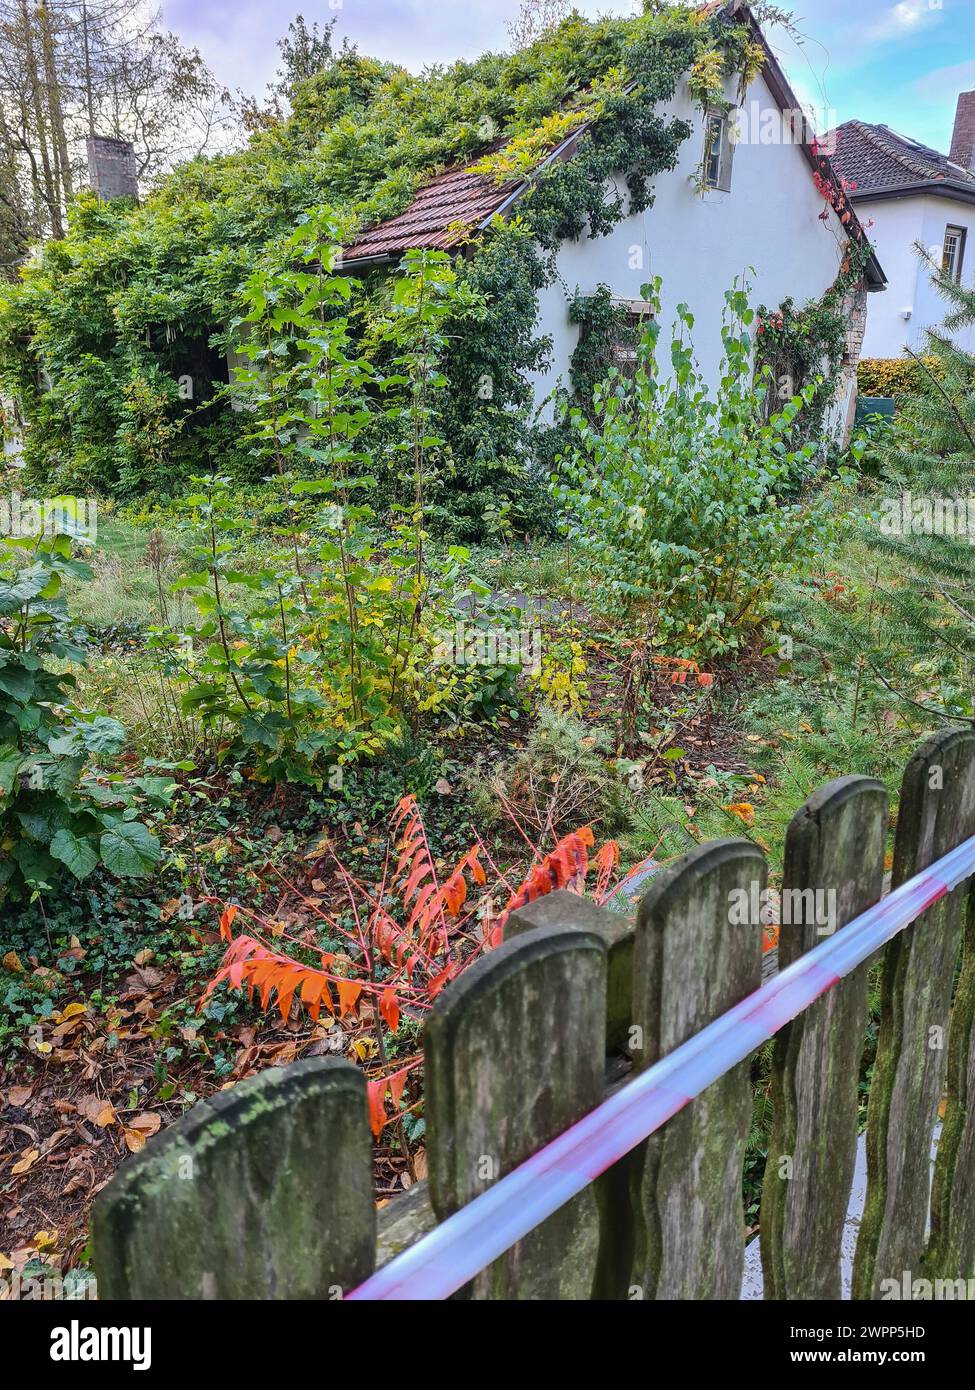 View from the street over the wooden fence with barrier tape to an overgrown abandoned house, overgrown with ivy and plants, Berlin, Germany Stock Photo